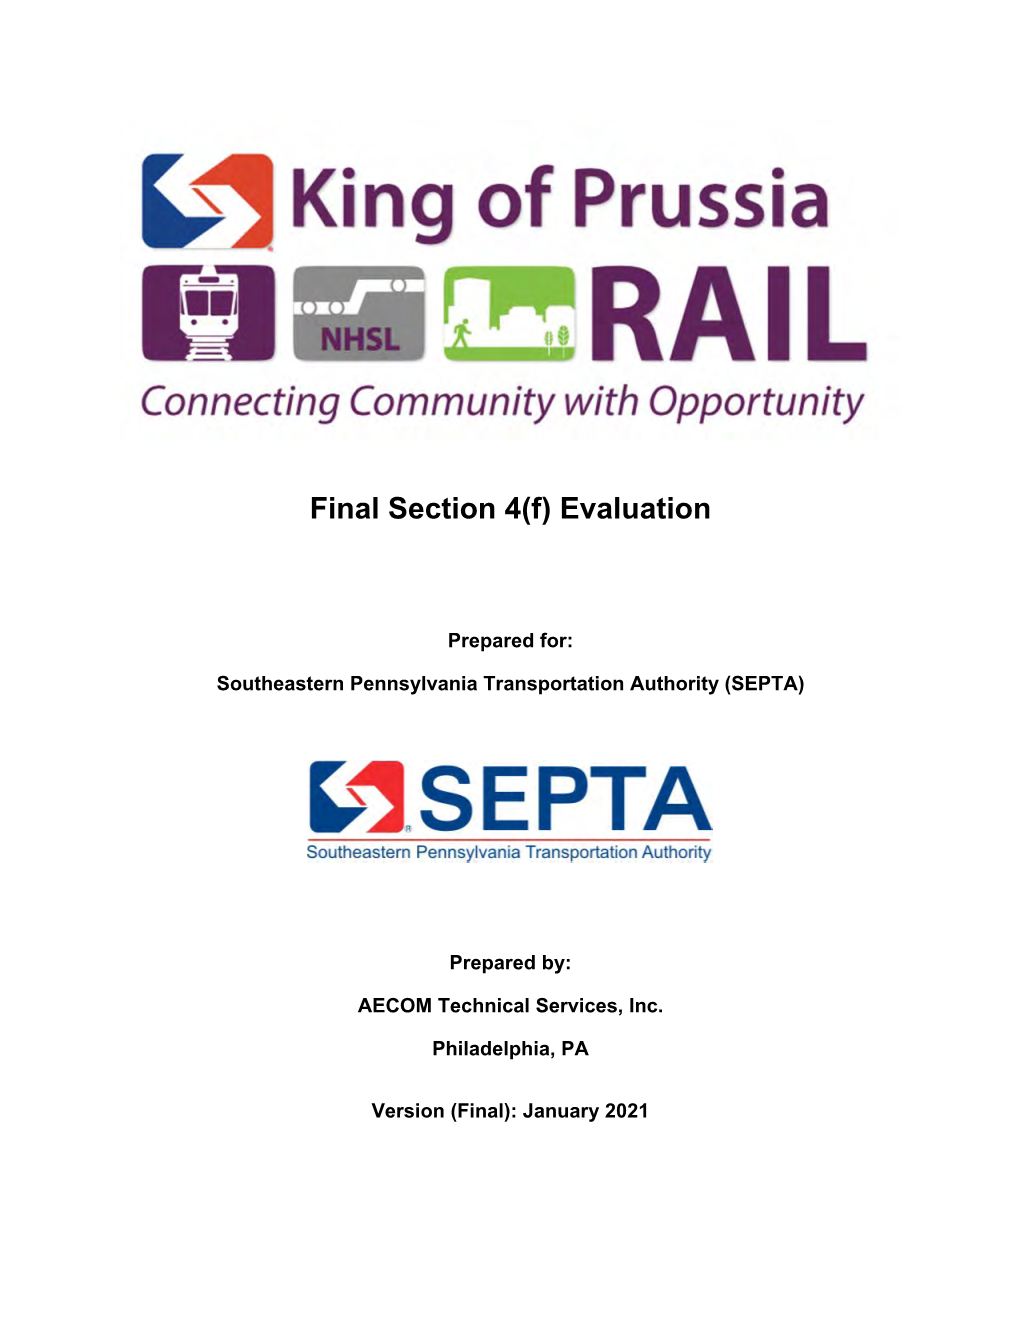 King of Prussia Rail Final Section 4(F) Evaluation